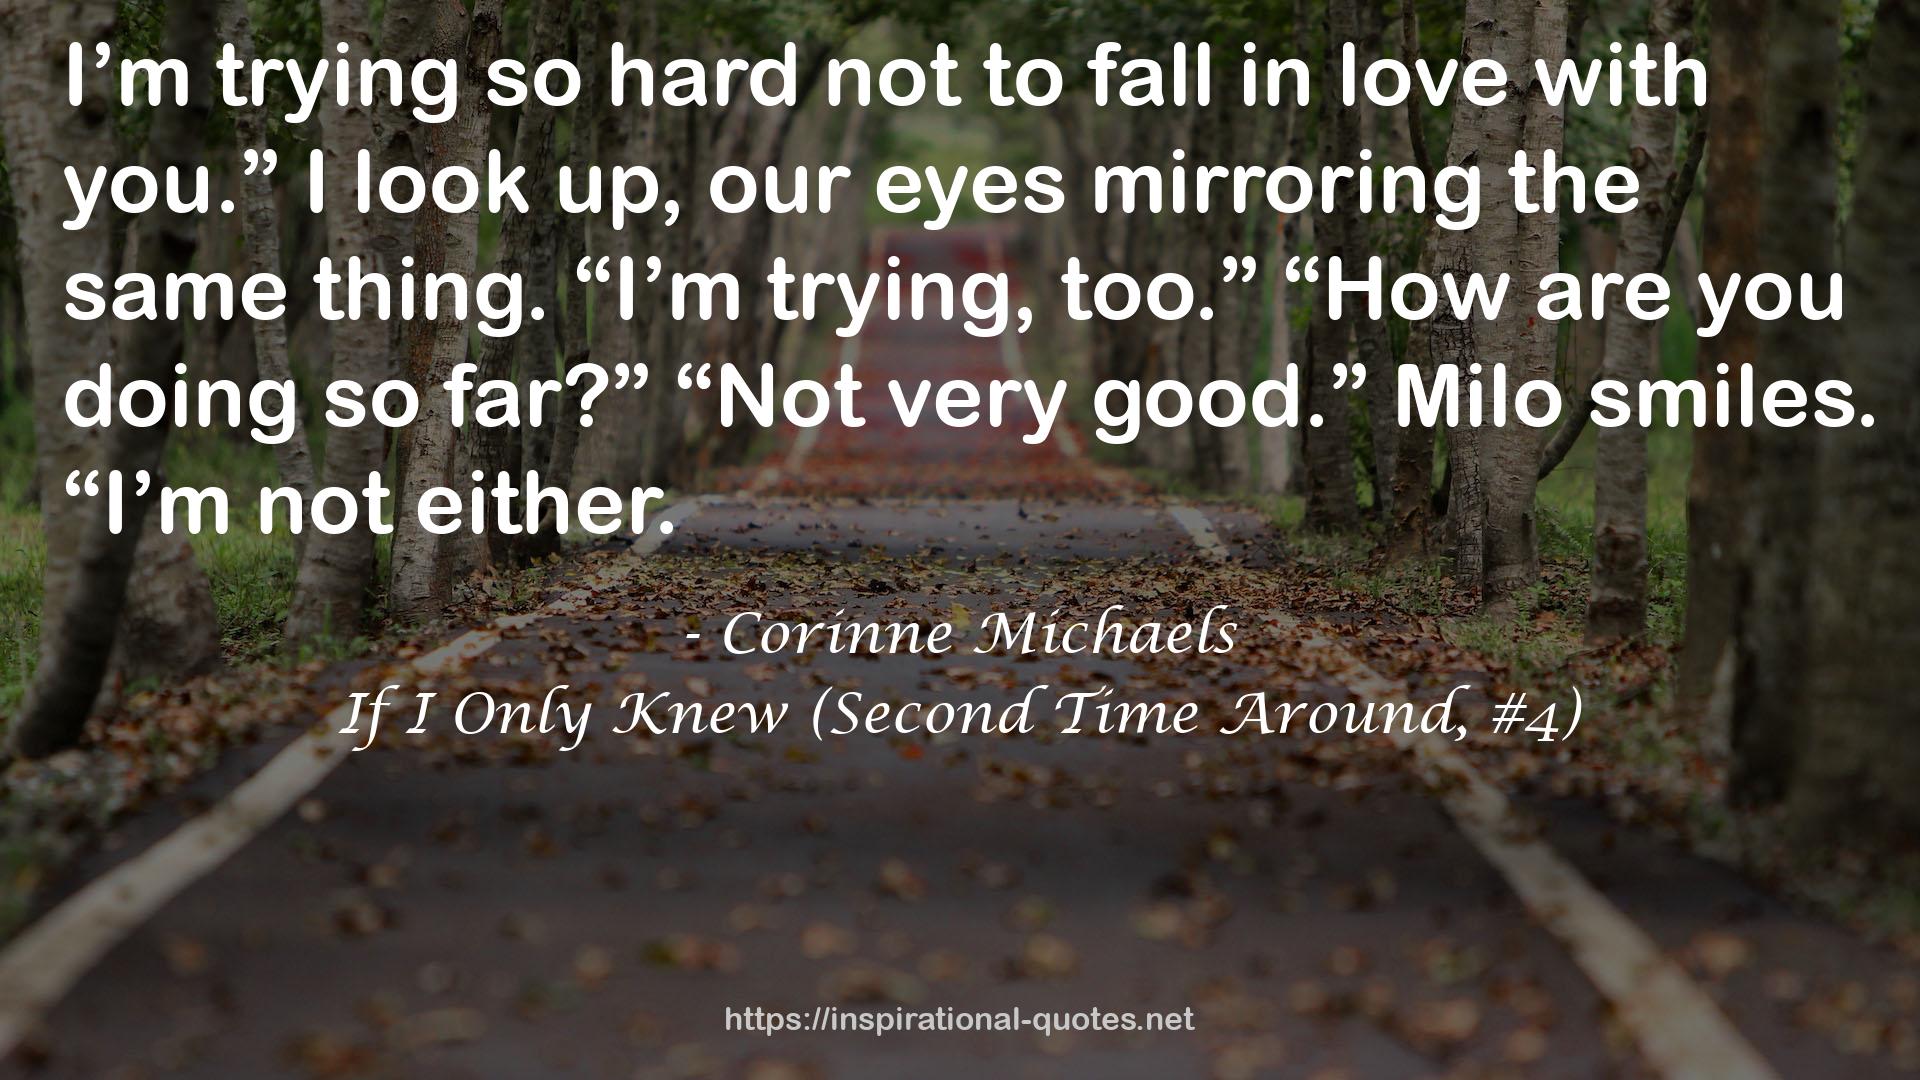 If I Only Knew (Second Time Around, #4) QUOTES